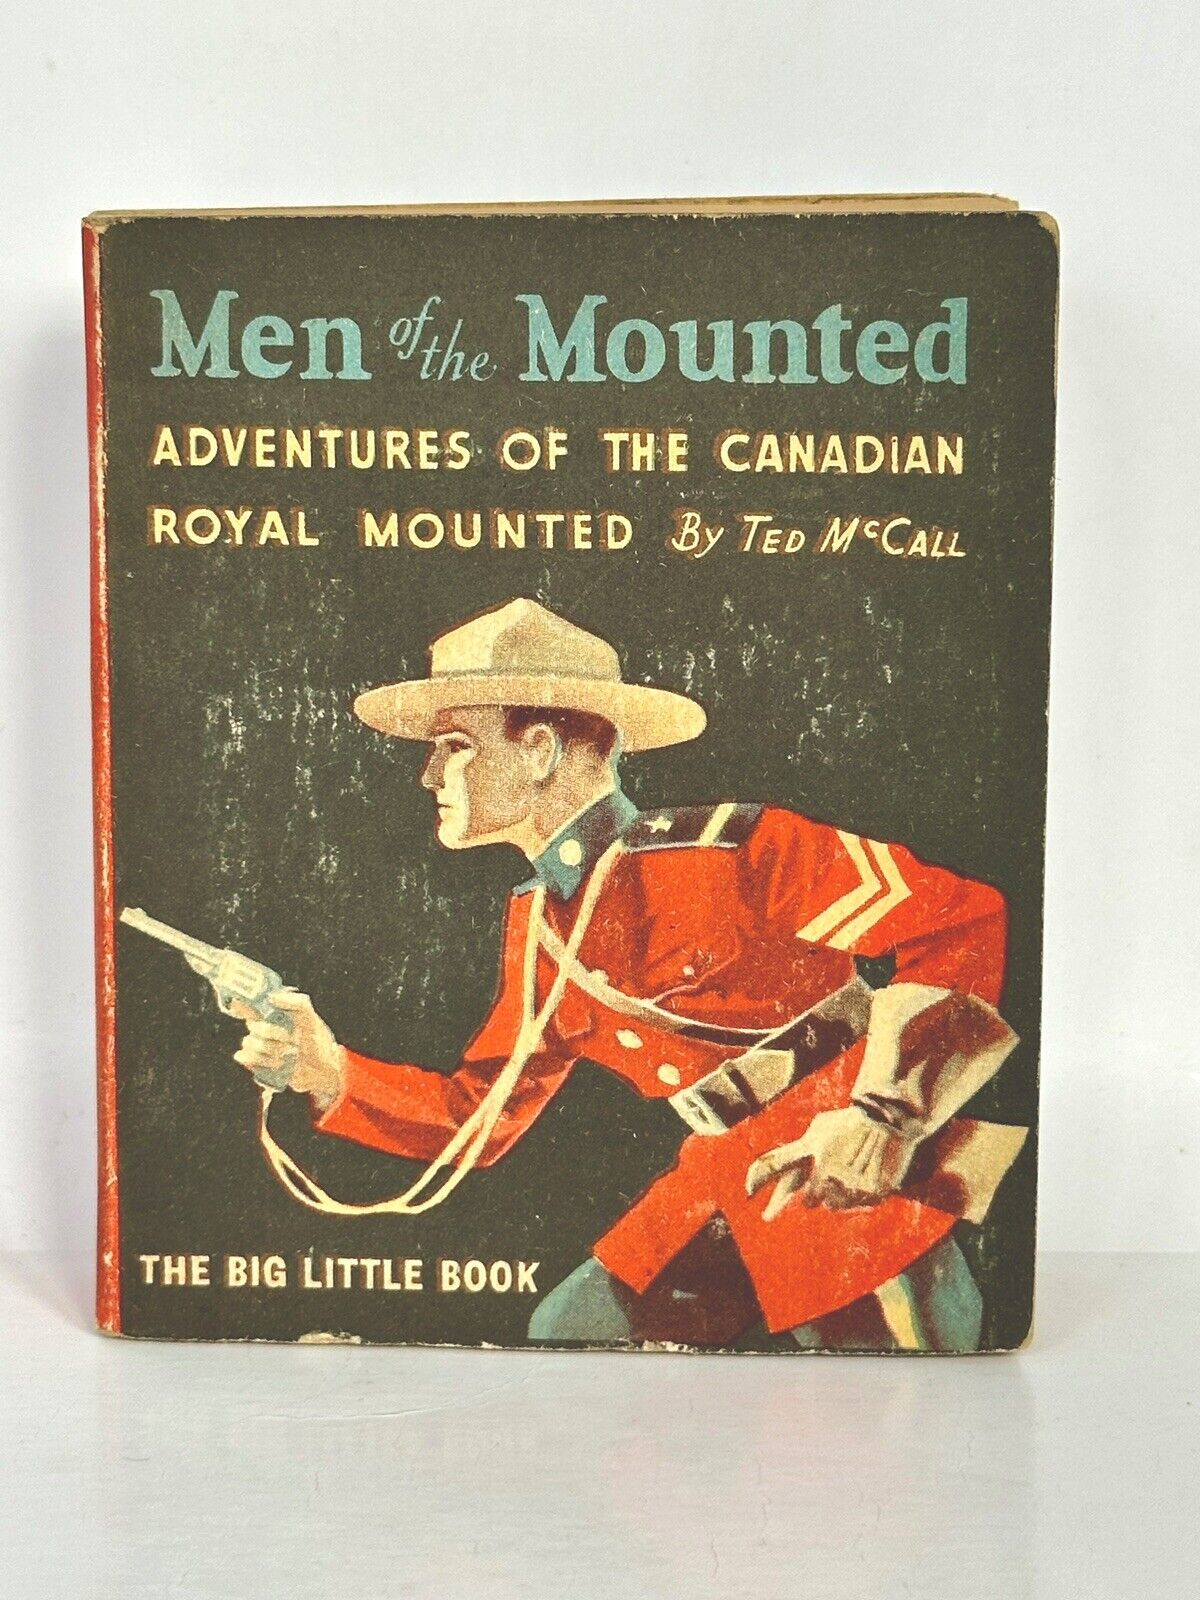 MEN OF MOUNTED 1930’S VFINE+  COCOMALT BIG LITTLE BOOK WHITMAN SOFT COVER NO RES